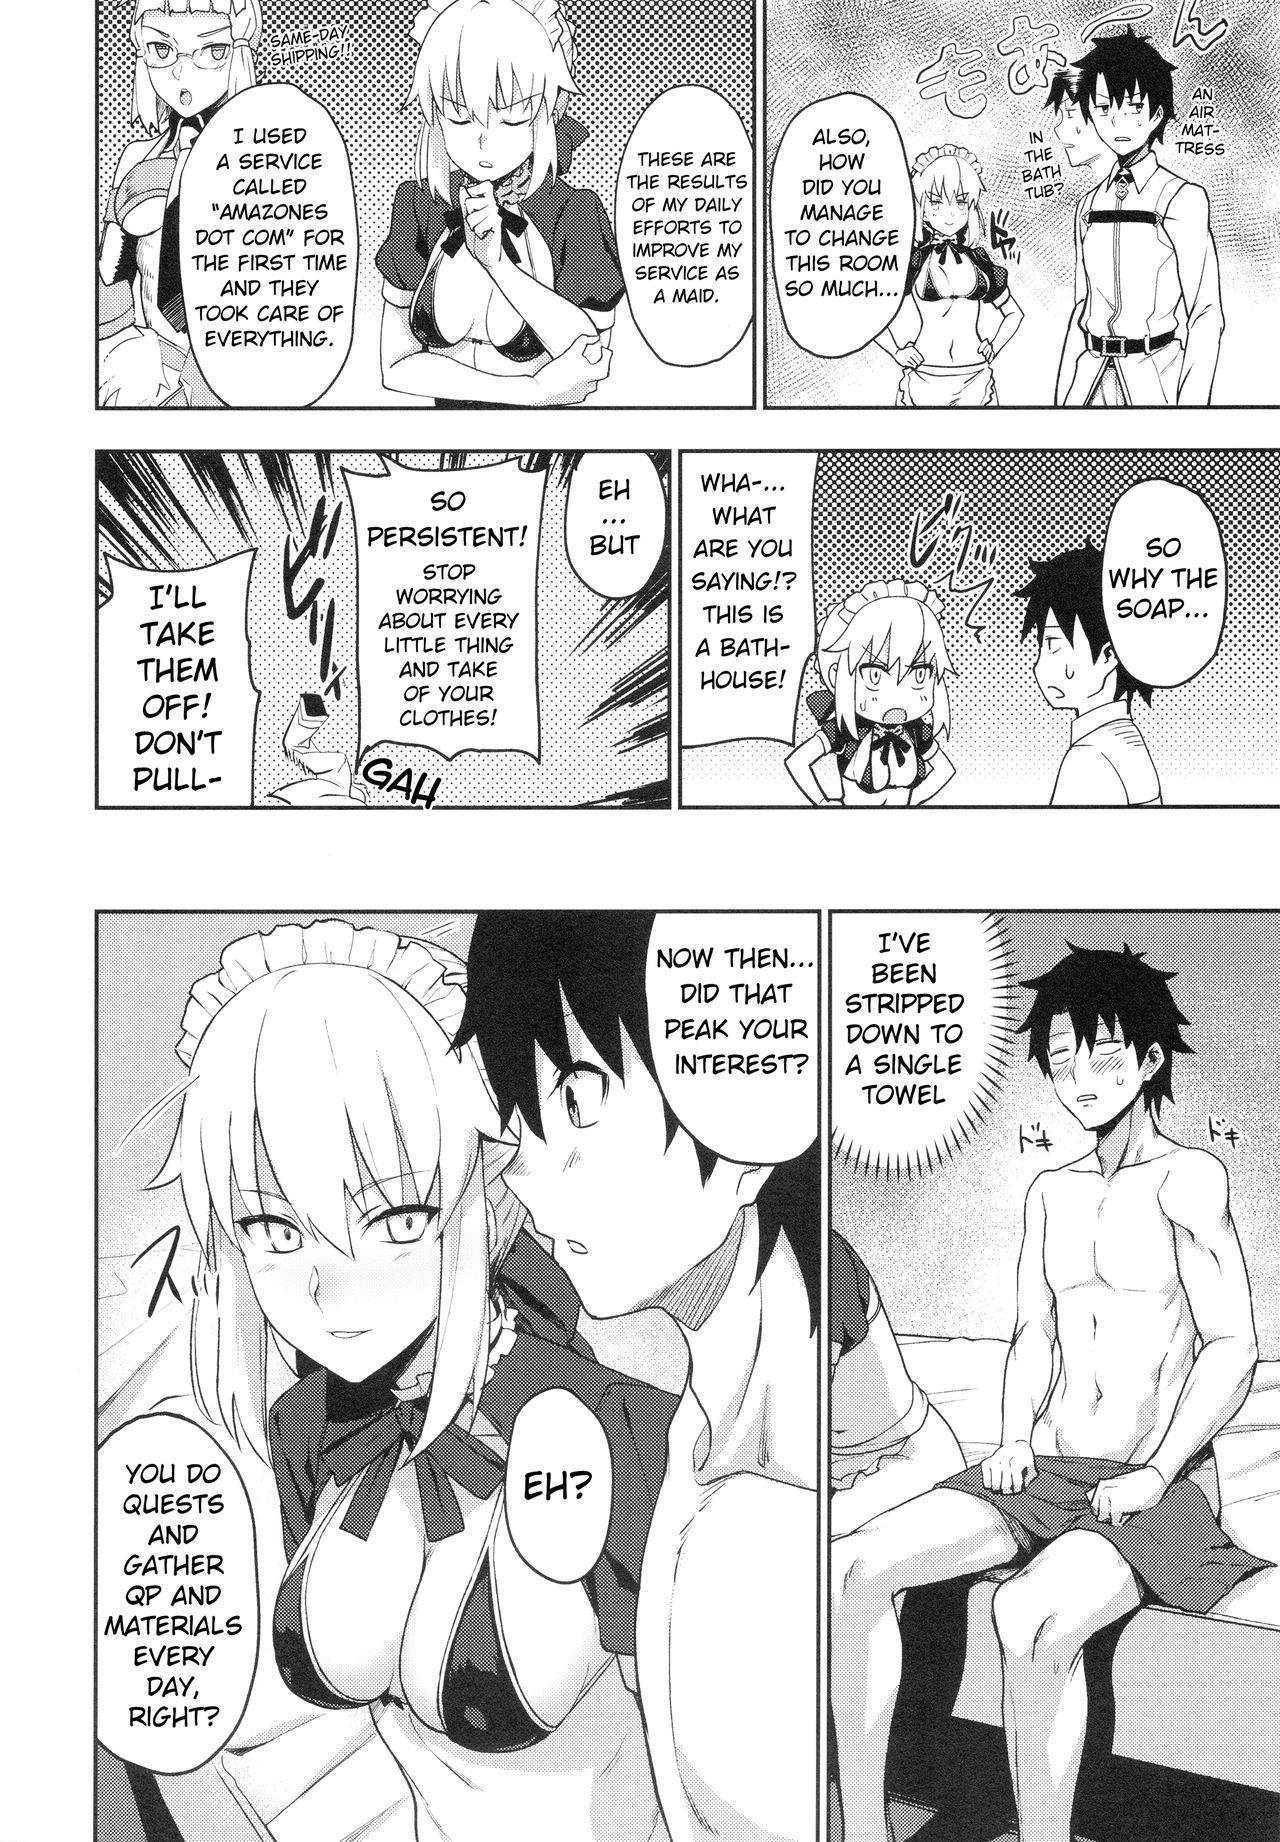 Phat Chaldea Soap SSS-kyuu Gohoushi Maid - Fate grand order Phat - Page 4